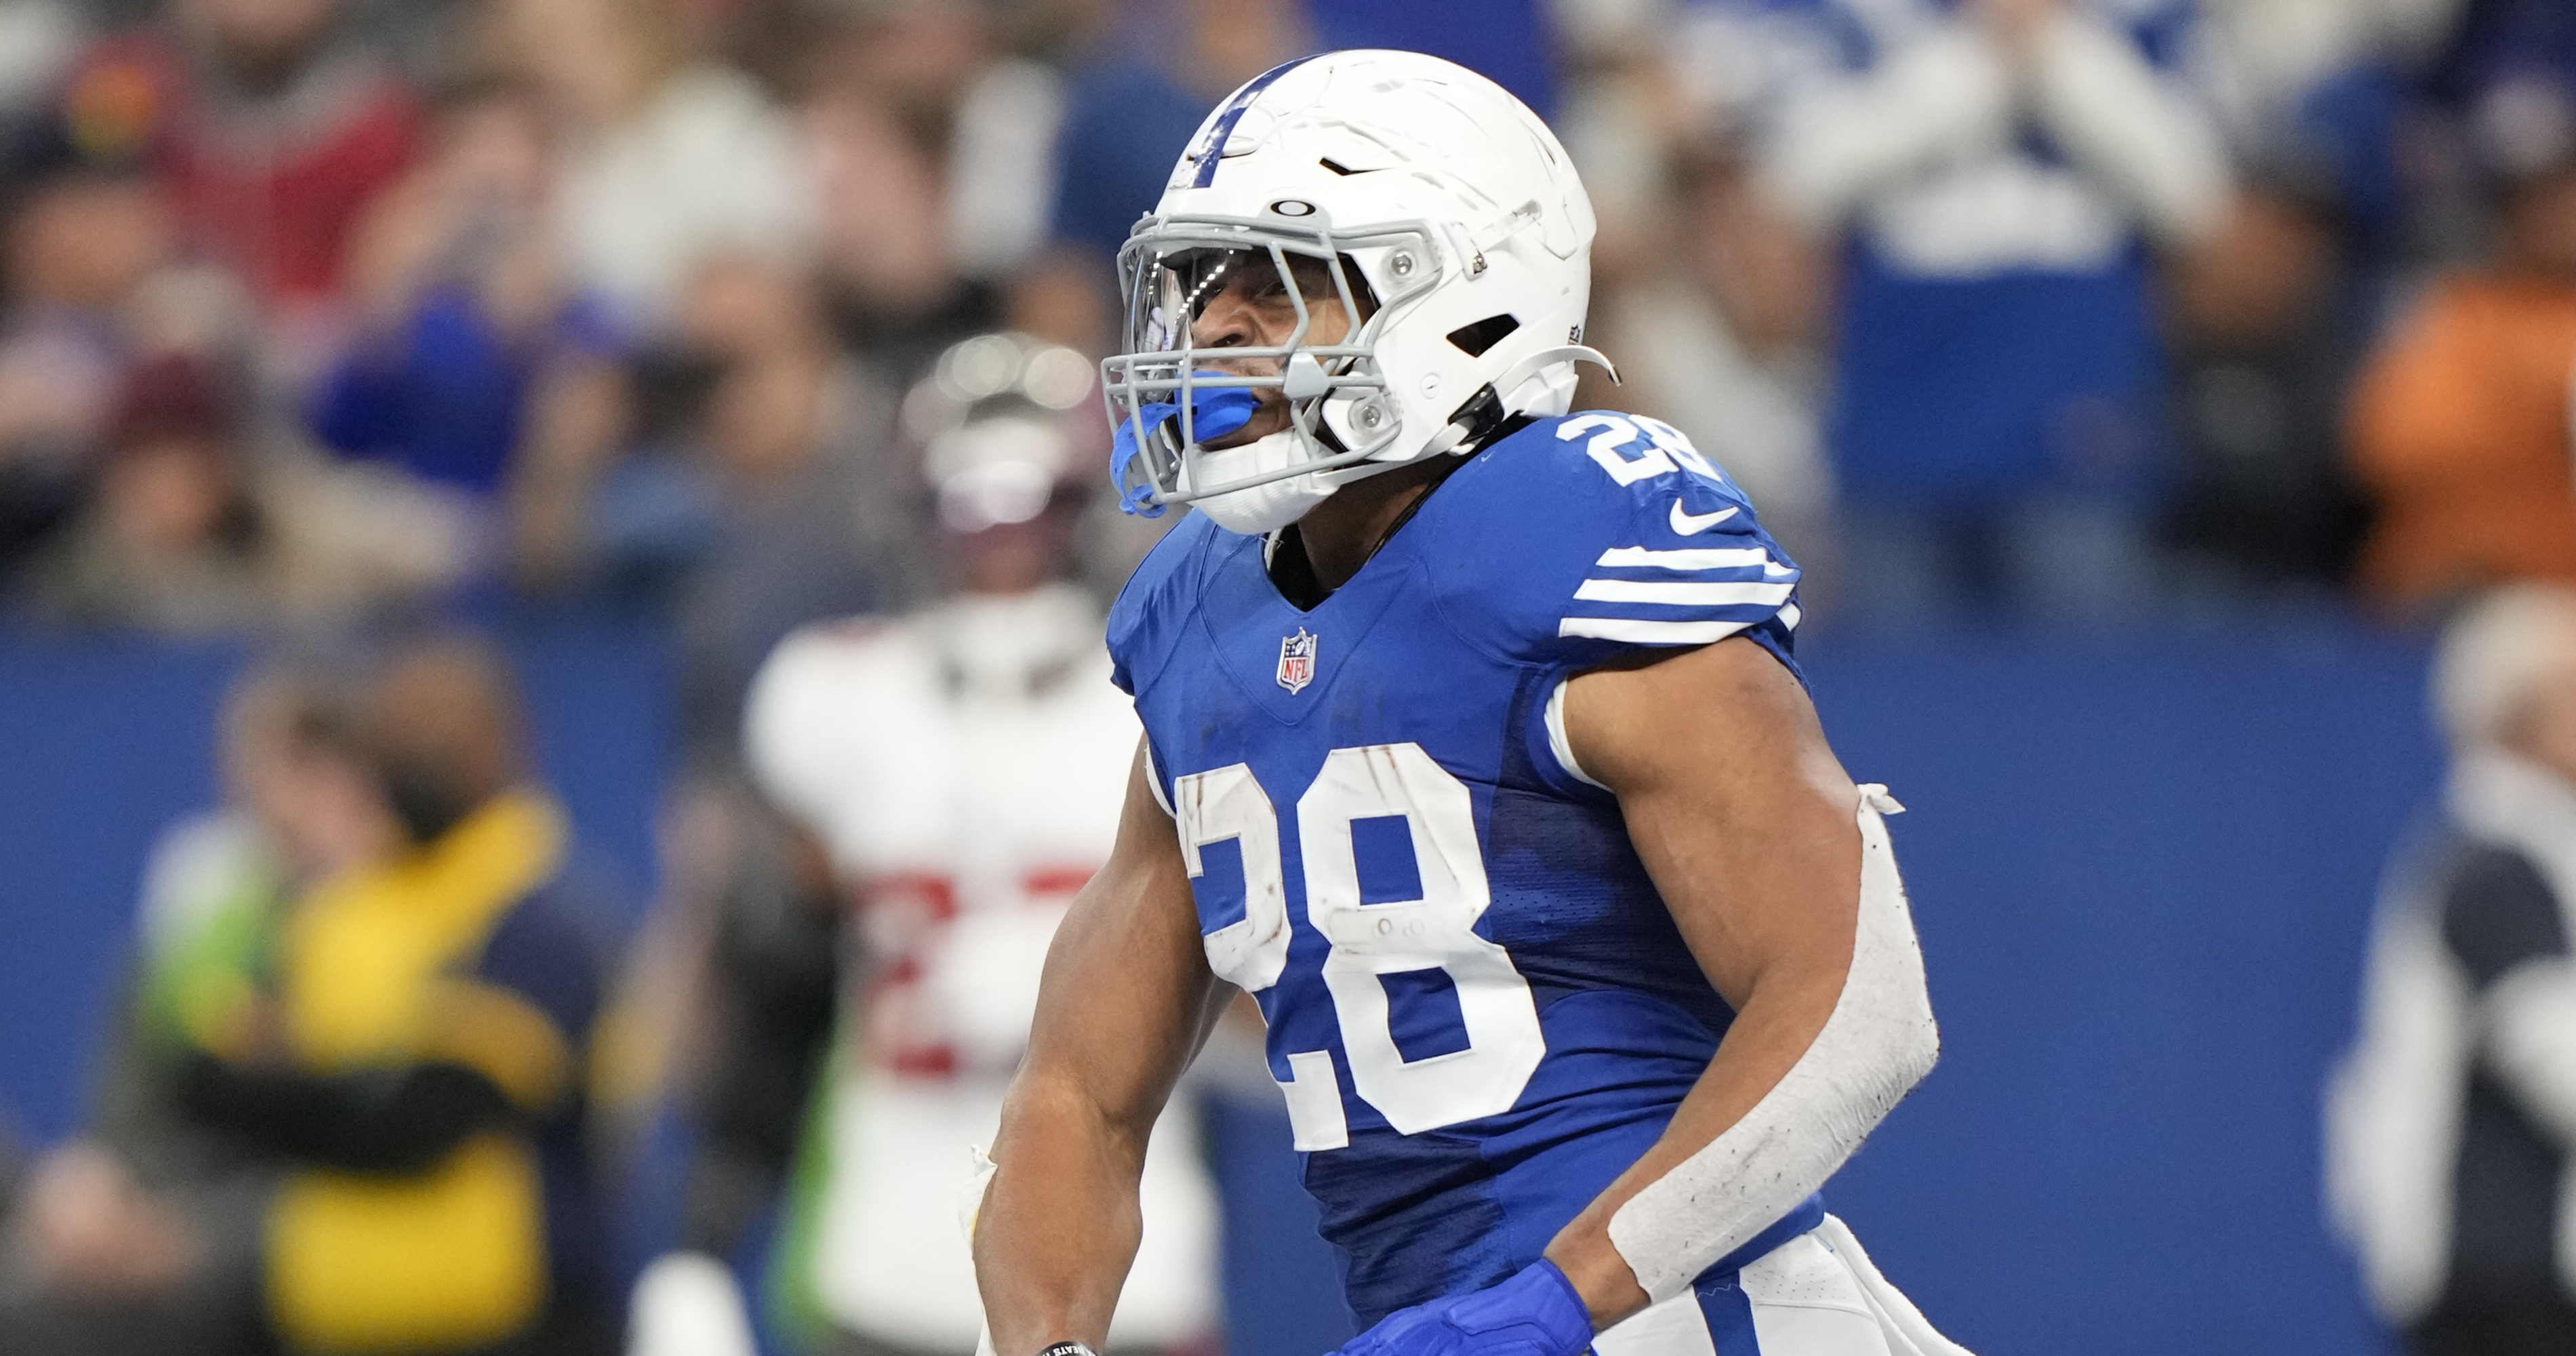 2022 Indianapolis Colts Schedule: Full Listing of Dates, Times and